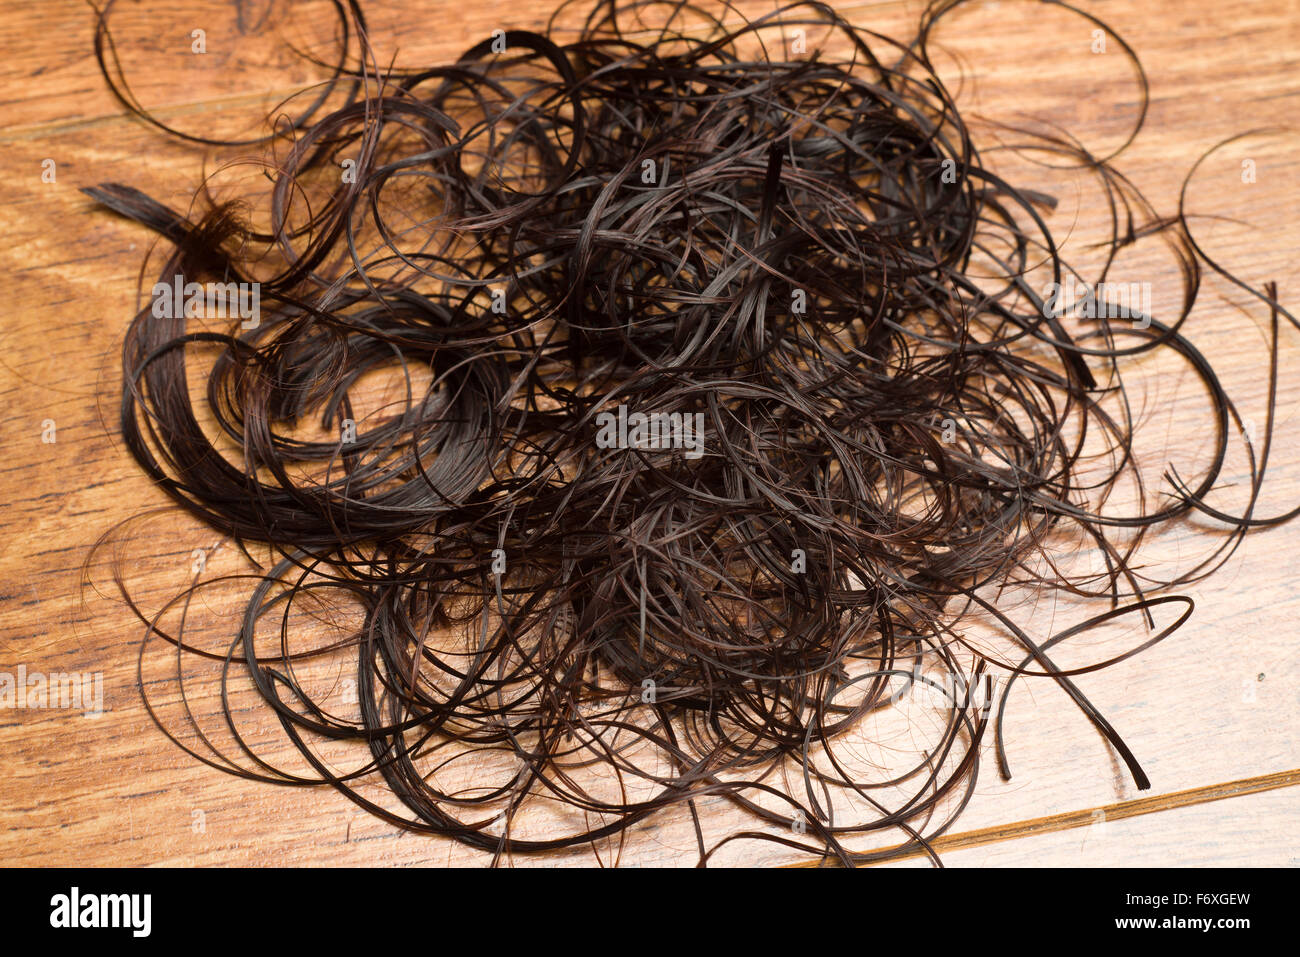 Hair clippings on a hairdressers floor. A womans cut brown hair on the floor of a hairdressing salon. Stock Photo